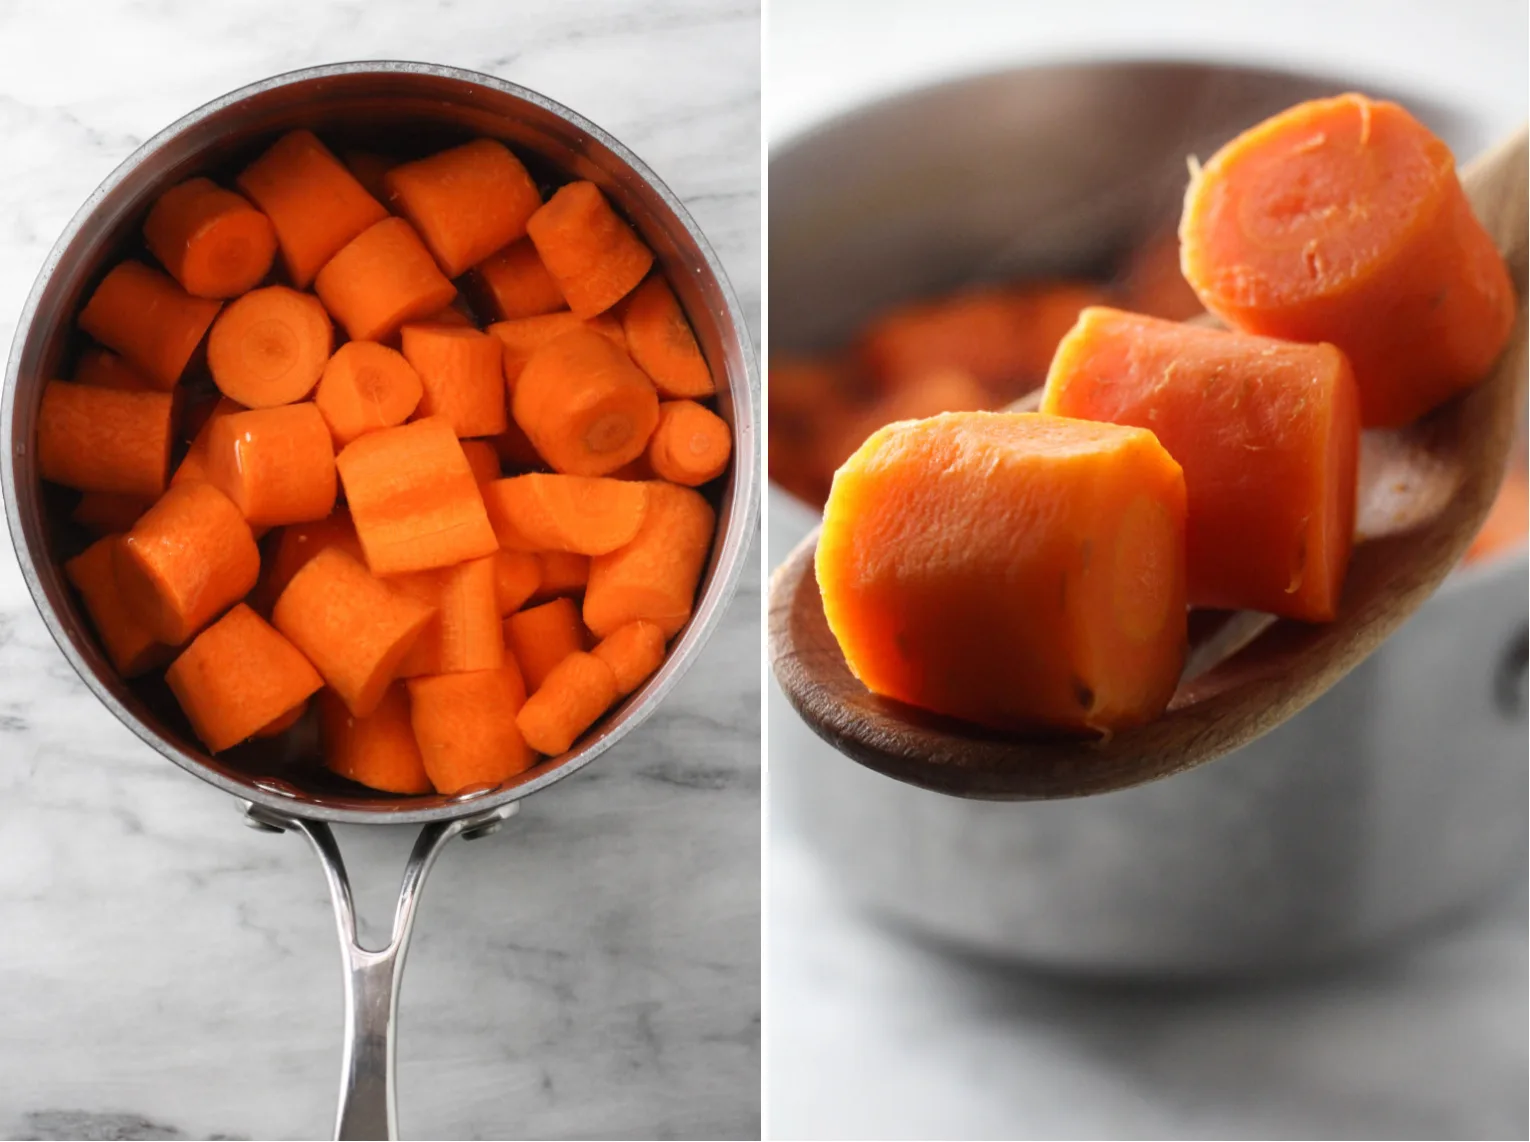 Collage of two images side-by-side. On the left, there is an image of carrot slices in a pot. On the right, cooked image slices on a wooden spoon.